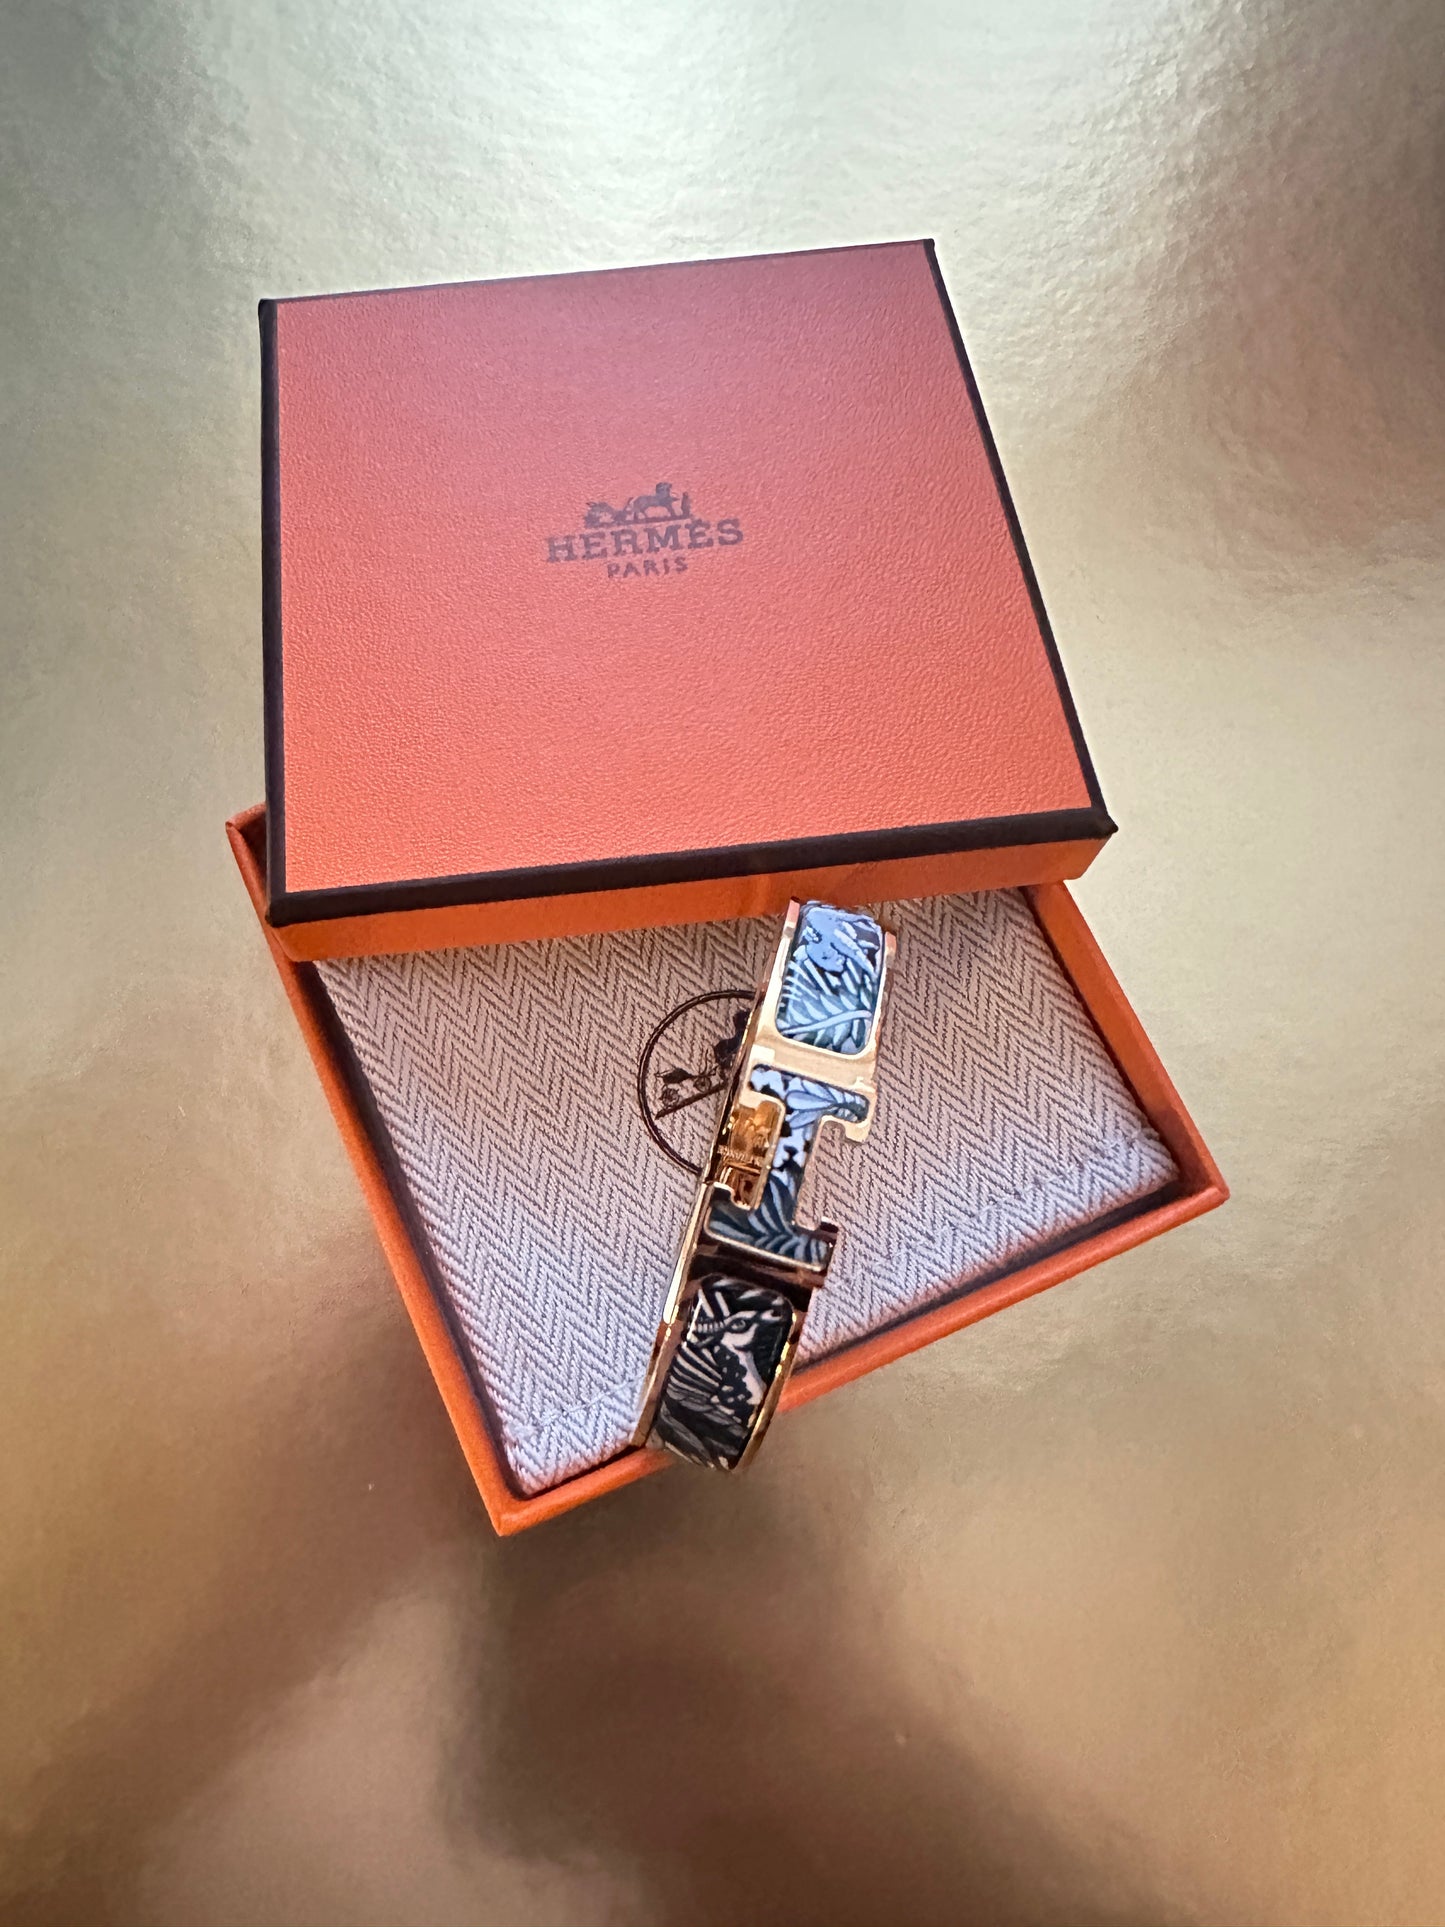 Hermes 100% Genuine Authentic Clic H Bangle Bracelet Animaux Camoufles Brand New with Box